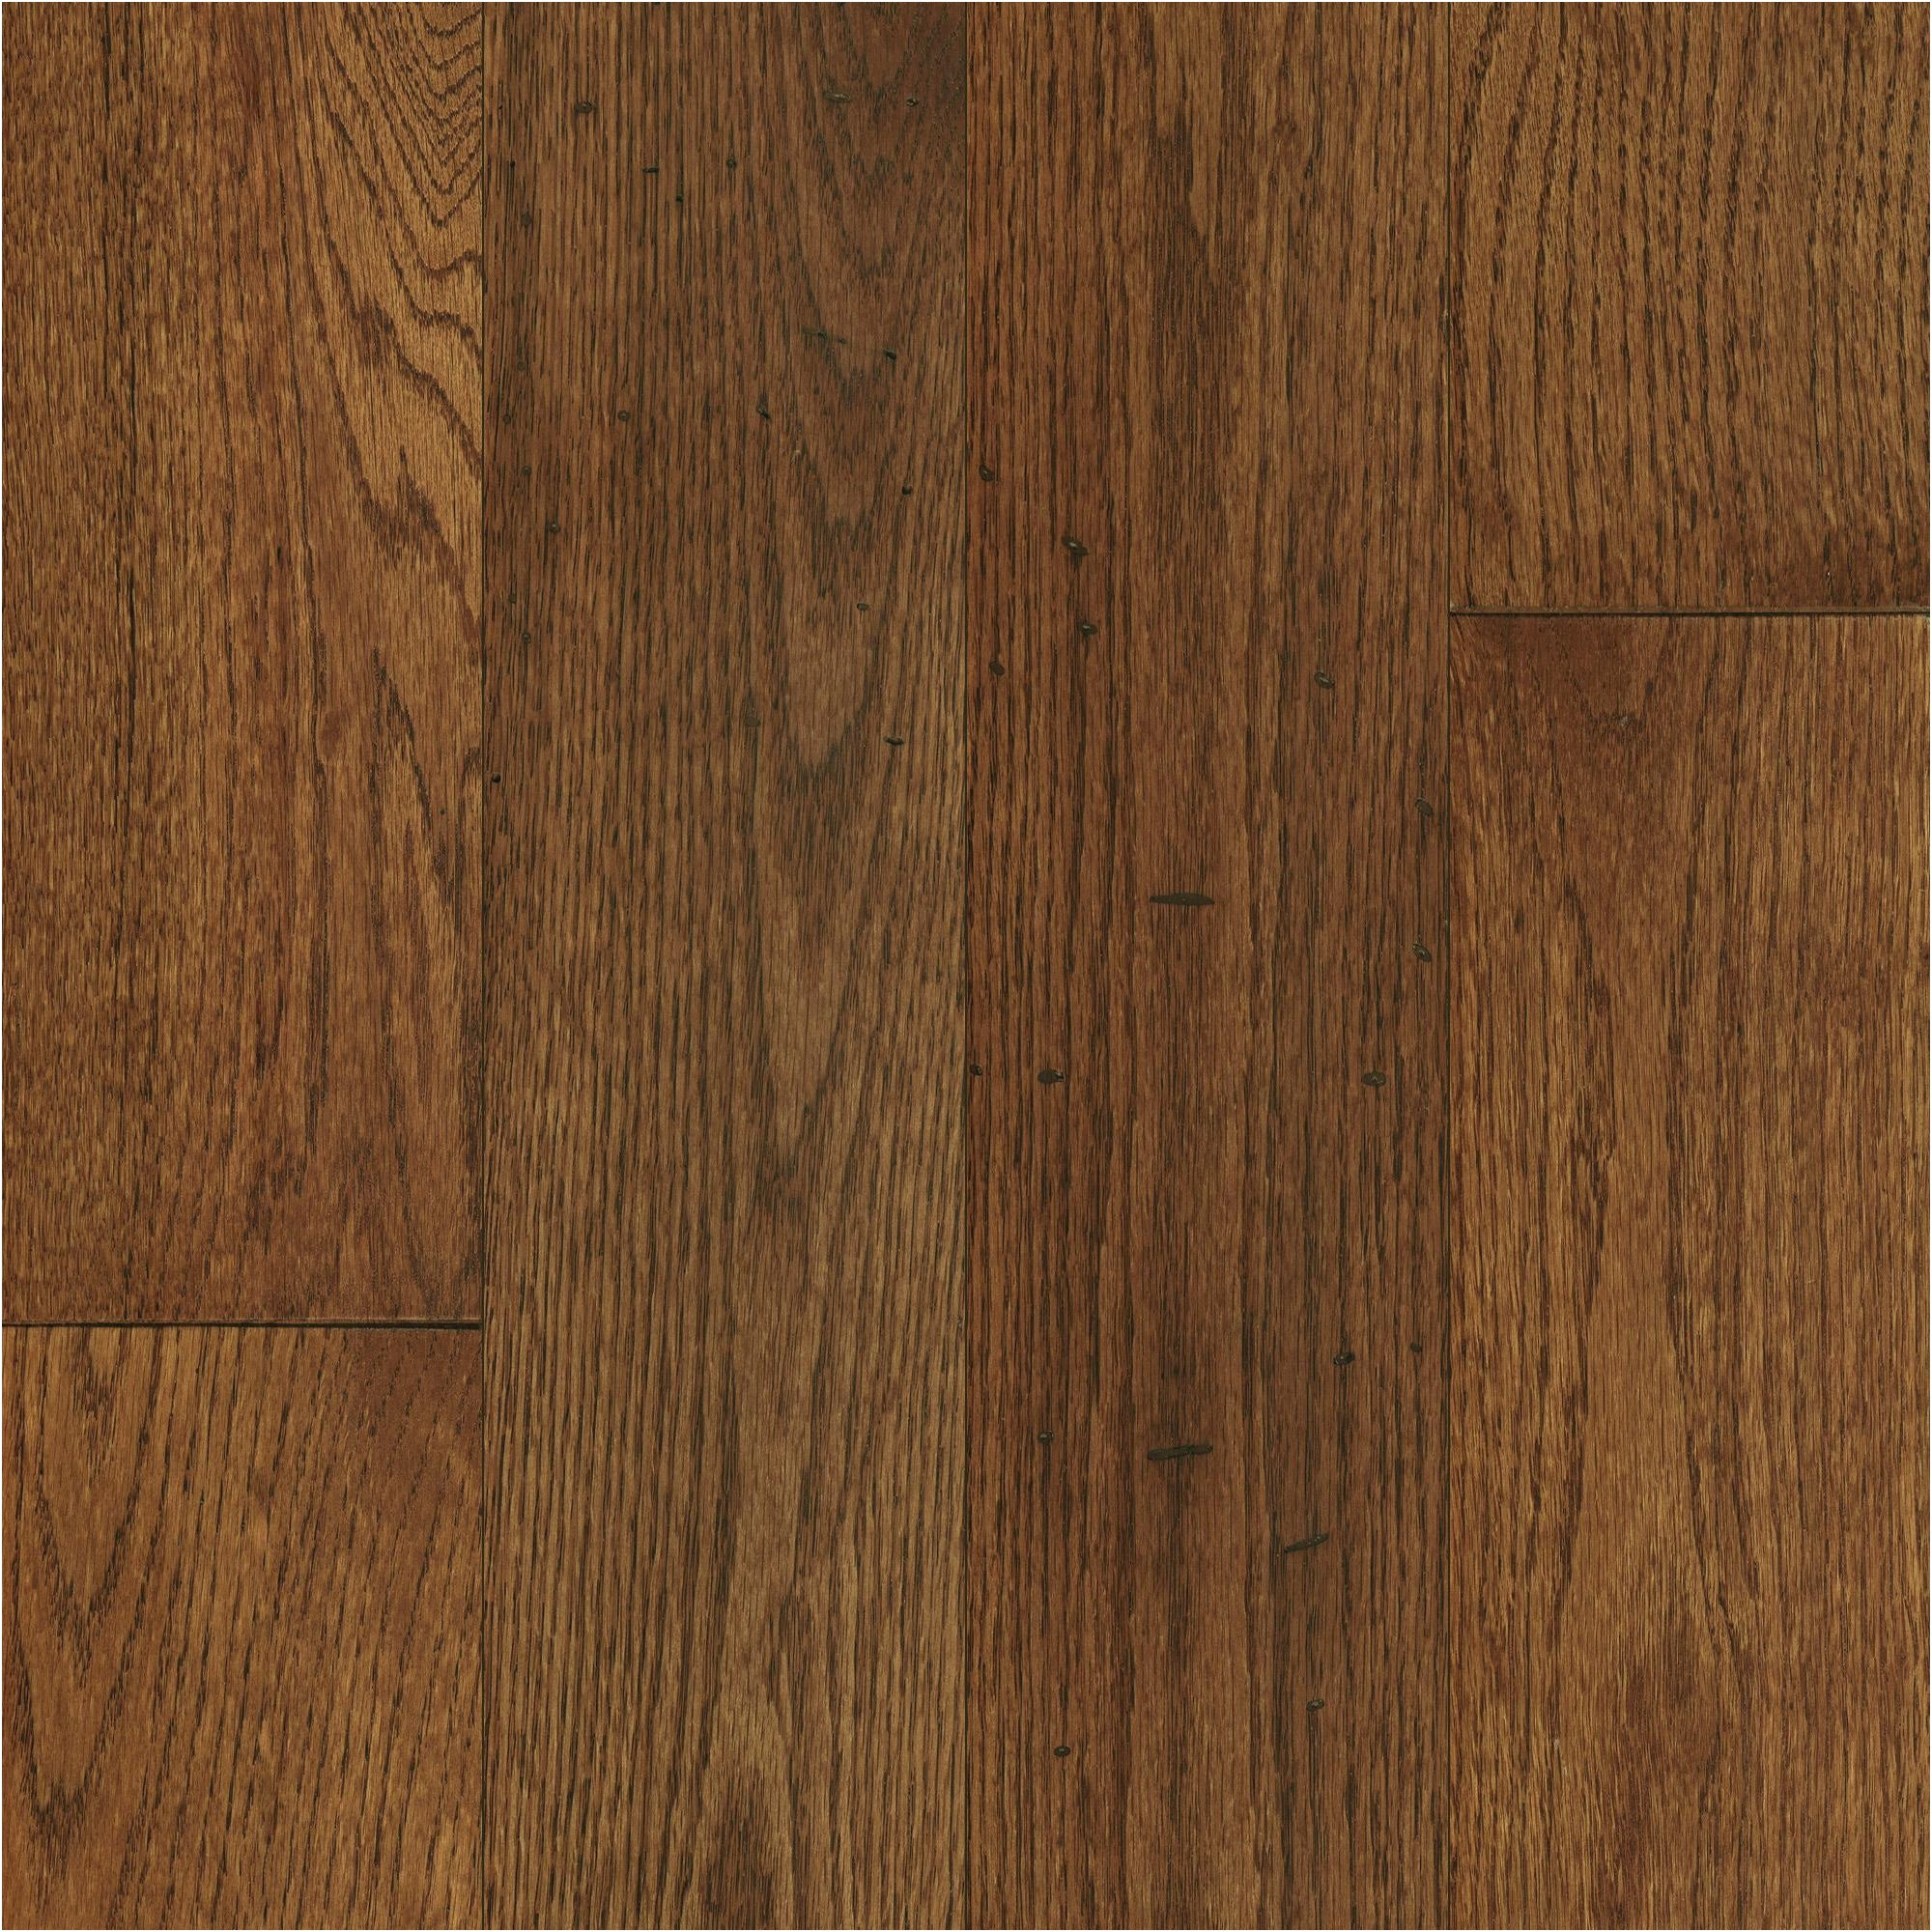 unfinished hardwood flooring dallas of unfinished hardwood flooring for sale new 3 4 x 5 select brazilian for related post